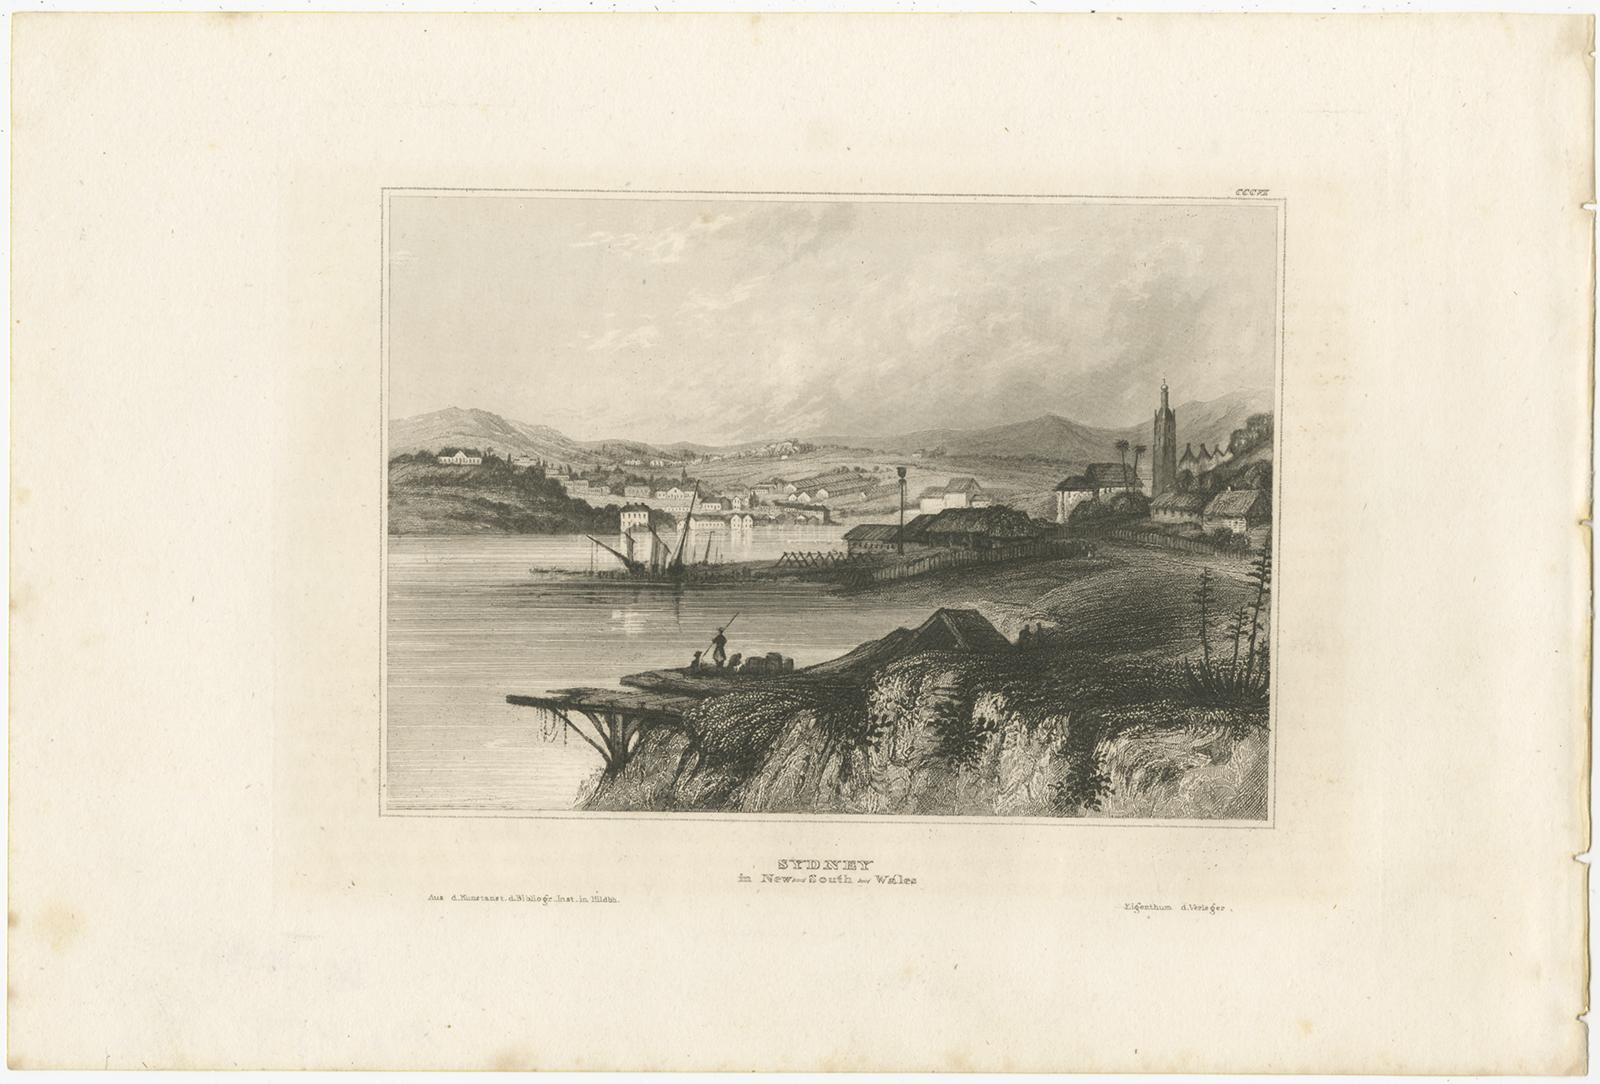 Antique print titled 'Sydney, in New South Wales'. View of Sydney, New South Wales, Australia. Originates from 'Meyers Universum'. Published circa 1840. 

Joseph Meyer (May 9, 1796 - June 27, 1856) was a German industrialist and publisher, most